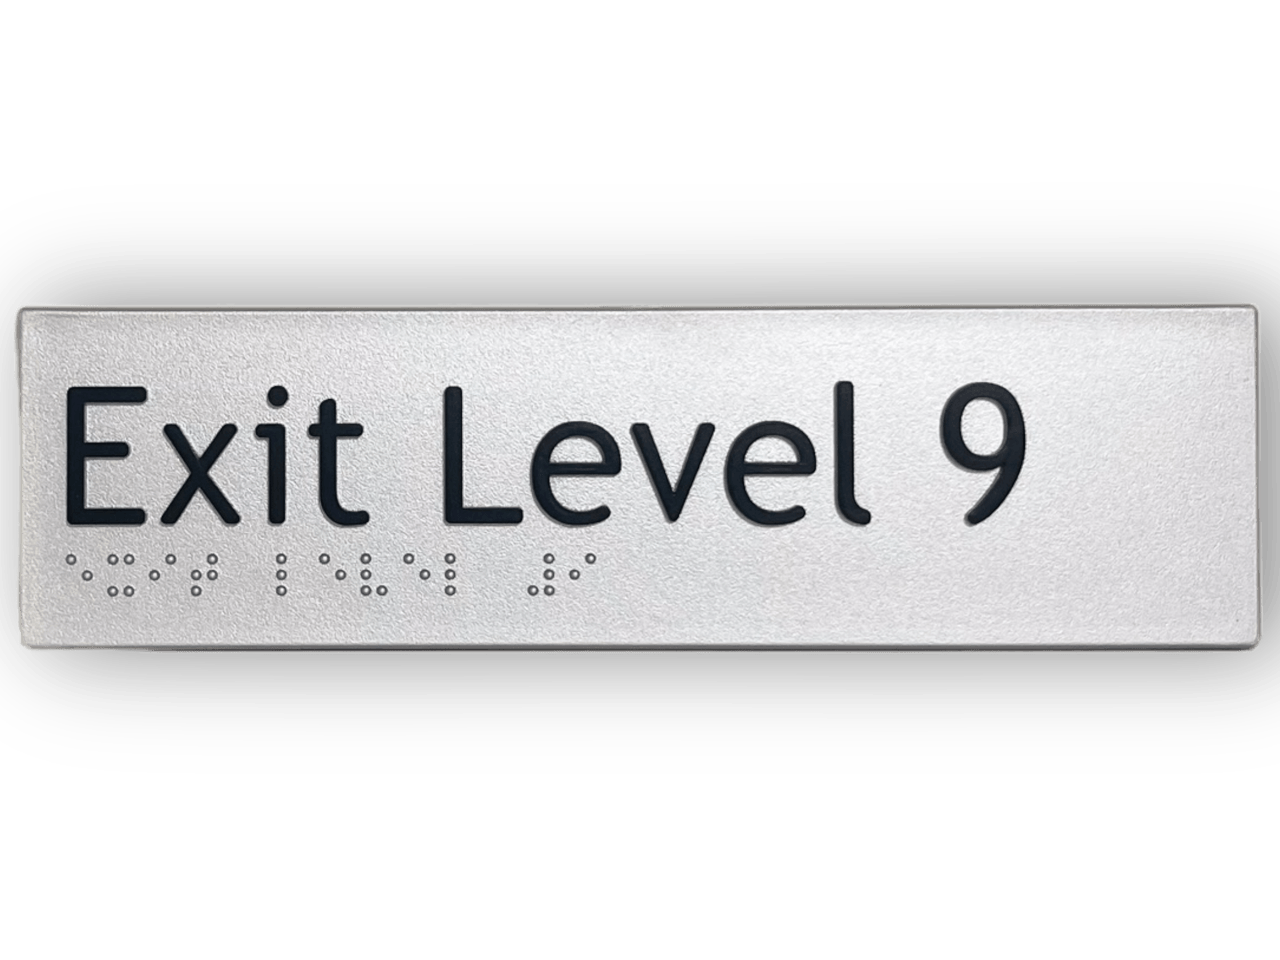 BRAILLE EXIT LEVEL 9 SIGN